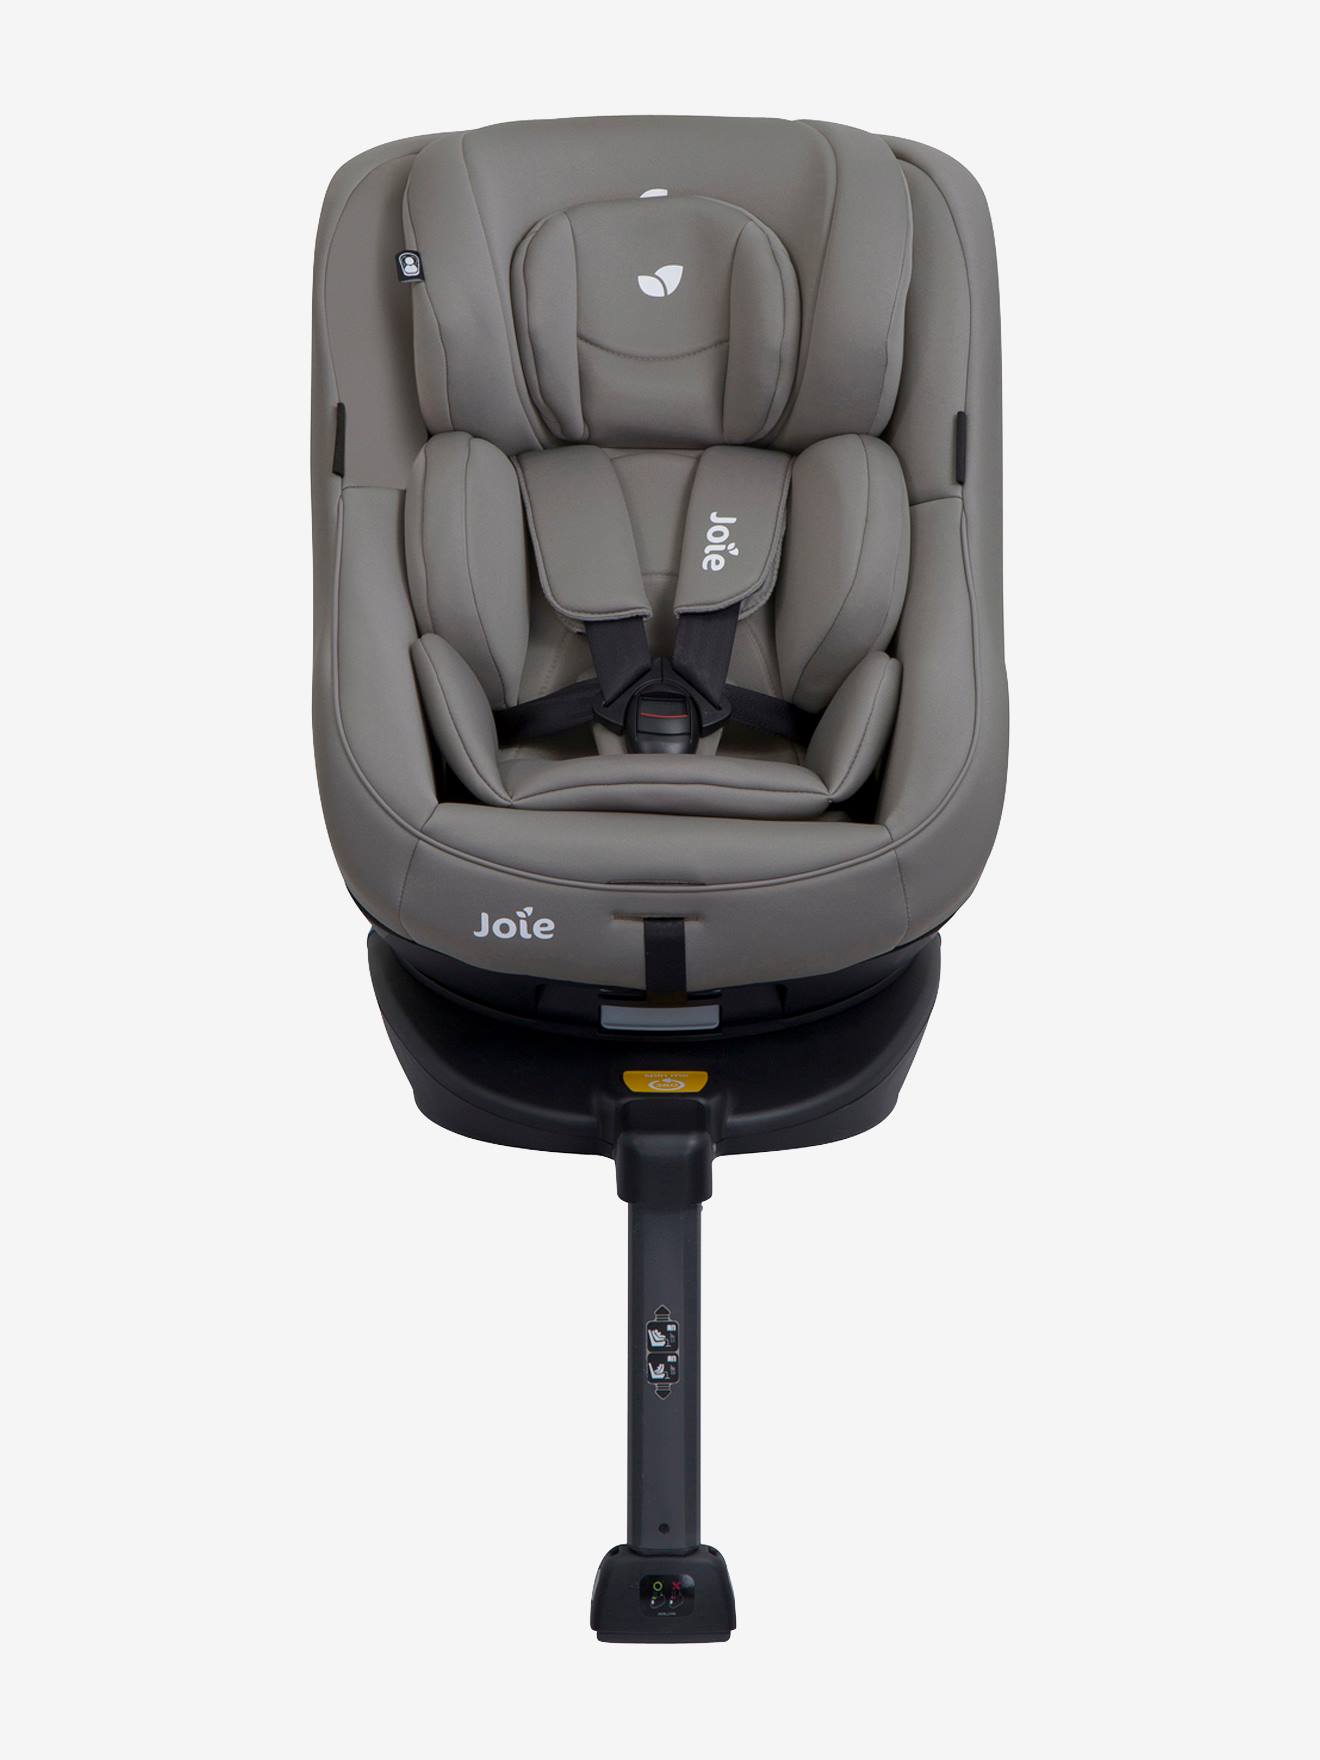 Siège-auto rotatif JOIE Spin 360 Isofix groupe 0+/1 gray flannel - Joie